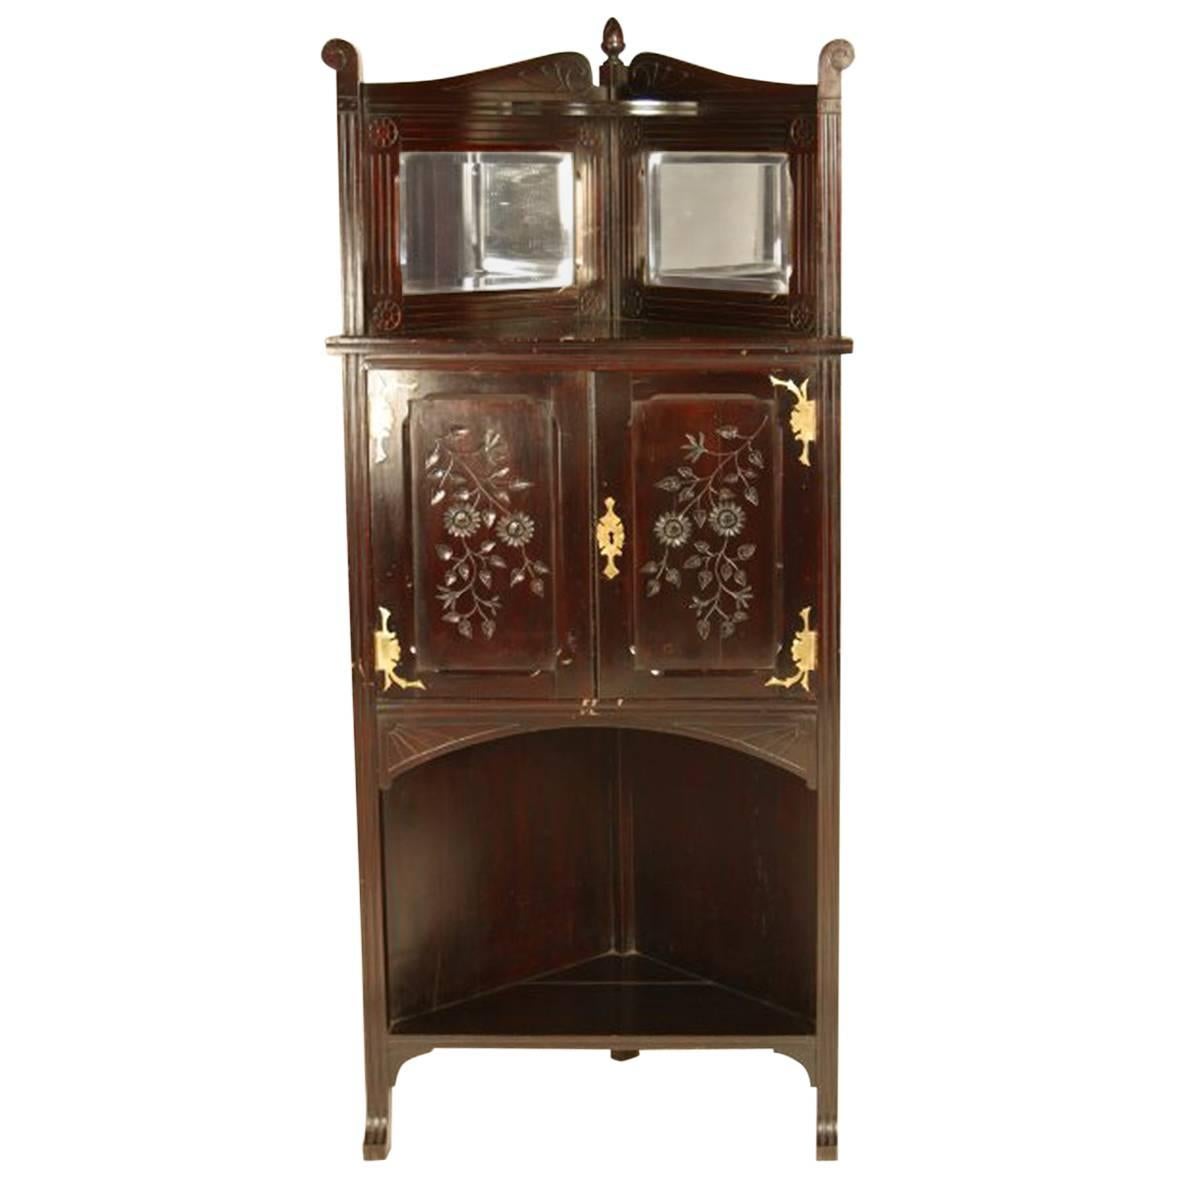 An Aesthetic Movement Mahogany Corner Cabinet with Incised Floral Decoration